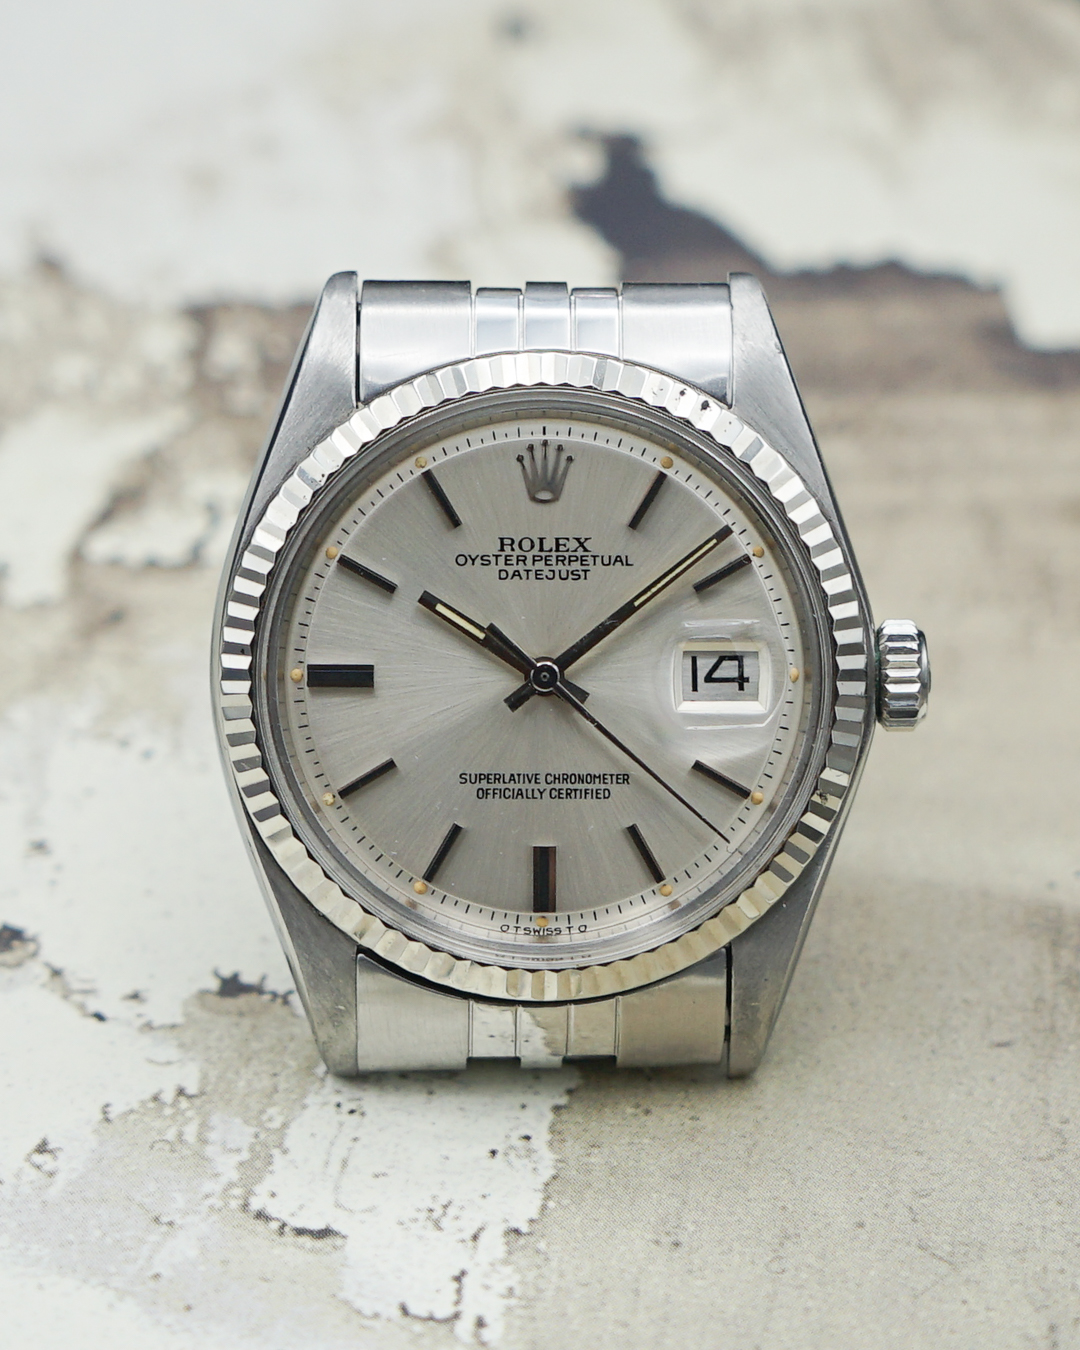 1973 Rolex Oyster Perpetual Datejust 1601 sigma dial - Sabiwatches